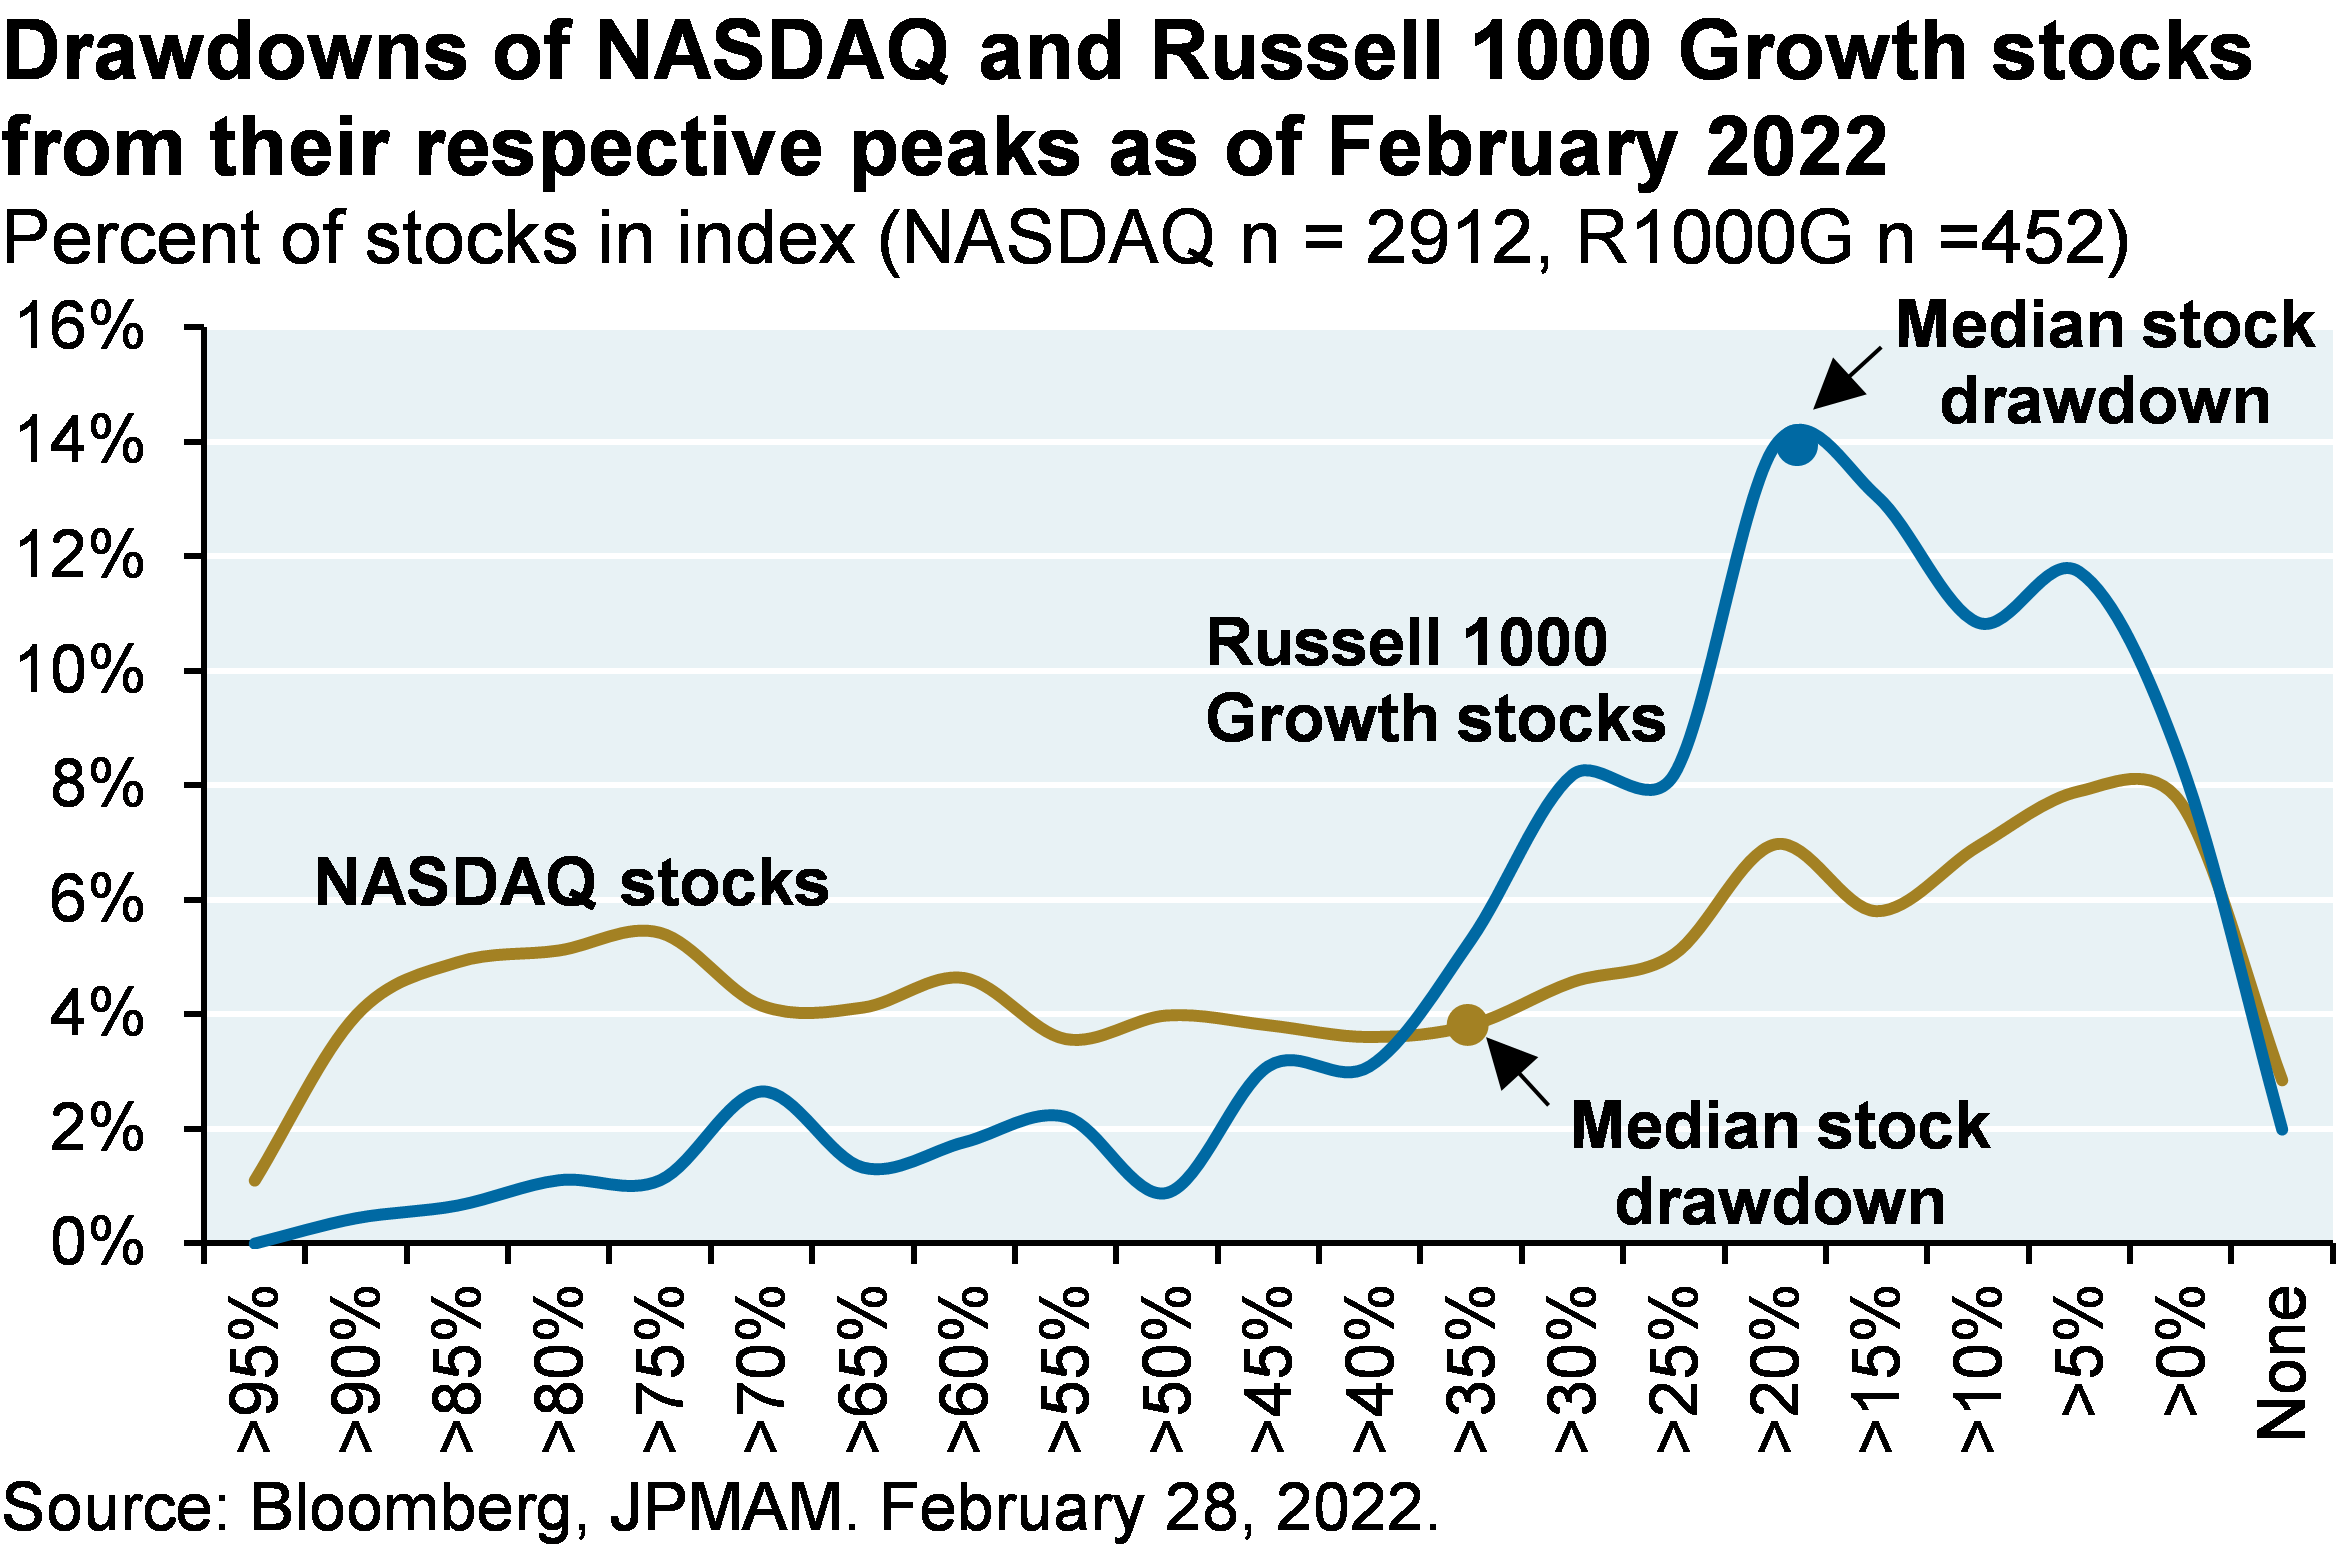 Histogram shows the percent of stocks in the NASDAQ and Russell 1000 Growth Indexes which have experienced drawdowns from 0-100% from 2021 to February 2022. As of February 28th, the median NASDAQ stock was down ~40% from its prior peak, and the median R1000G stock was down ~20% from its peak.